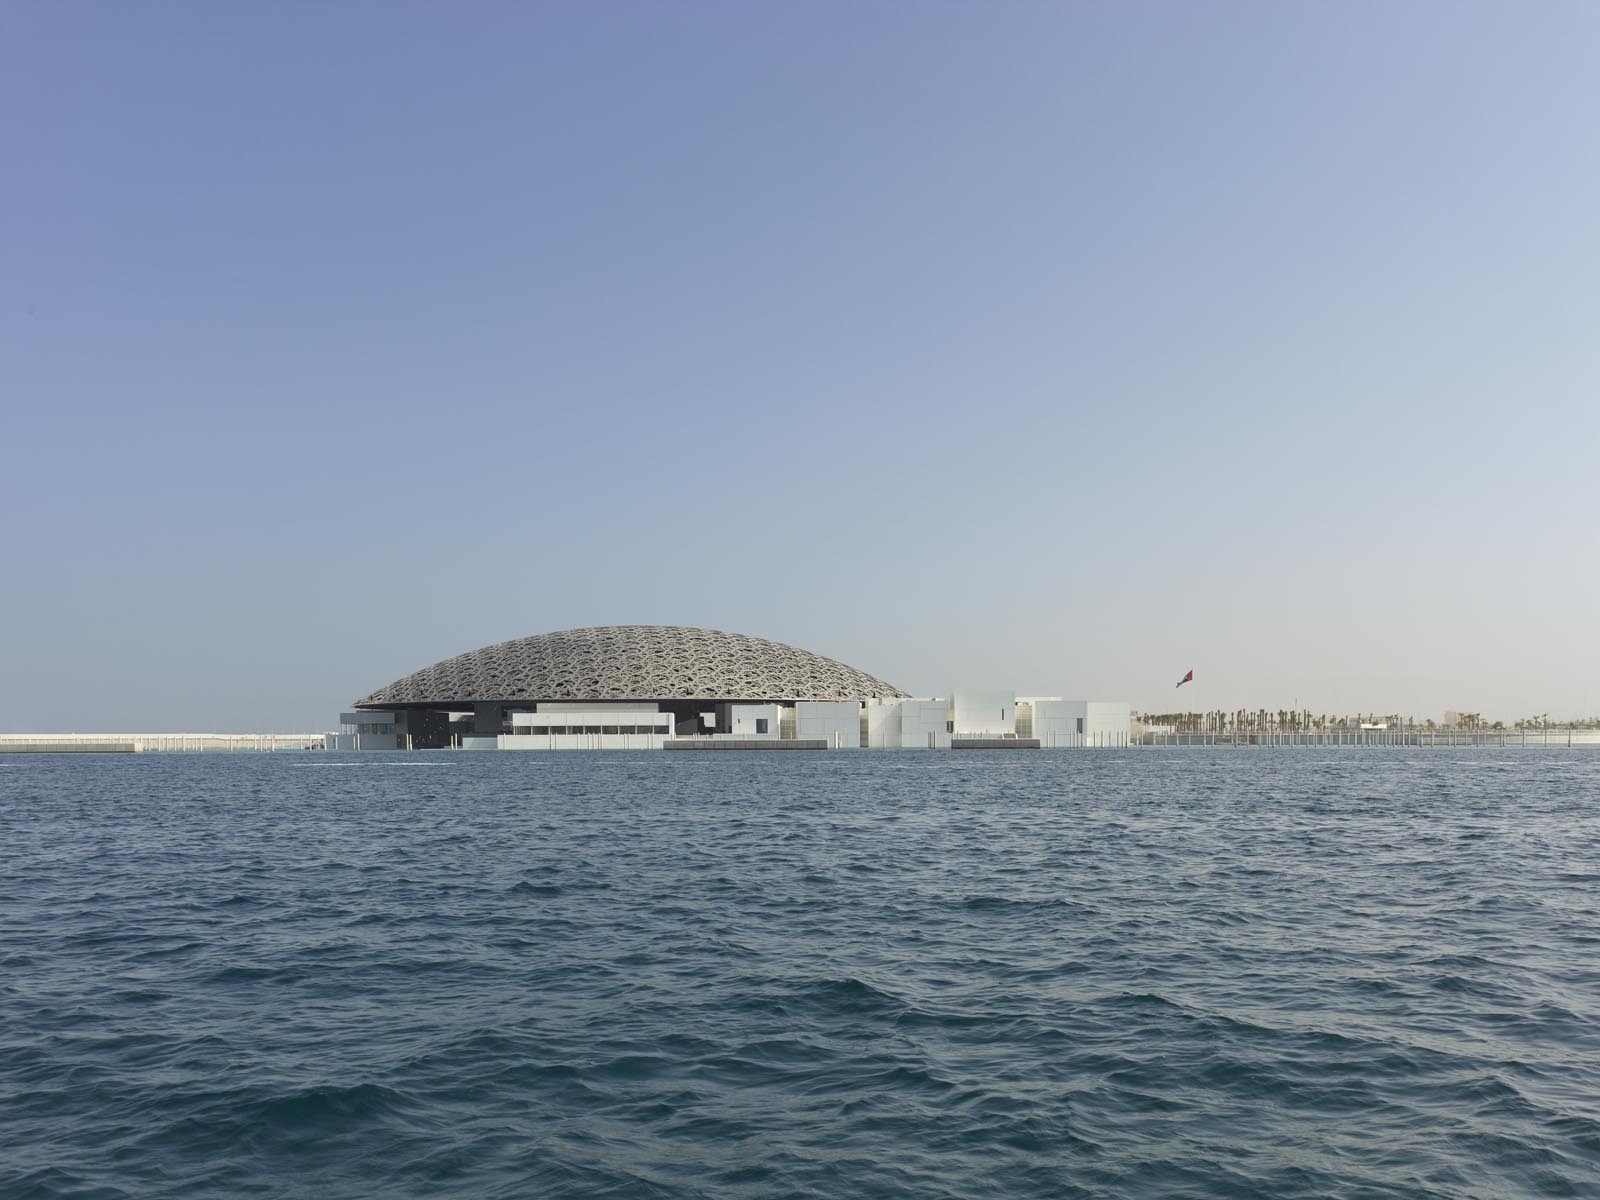 Contextualism at the Louvre Abu Dhabi, UAE